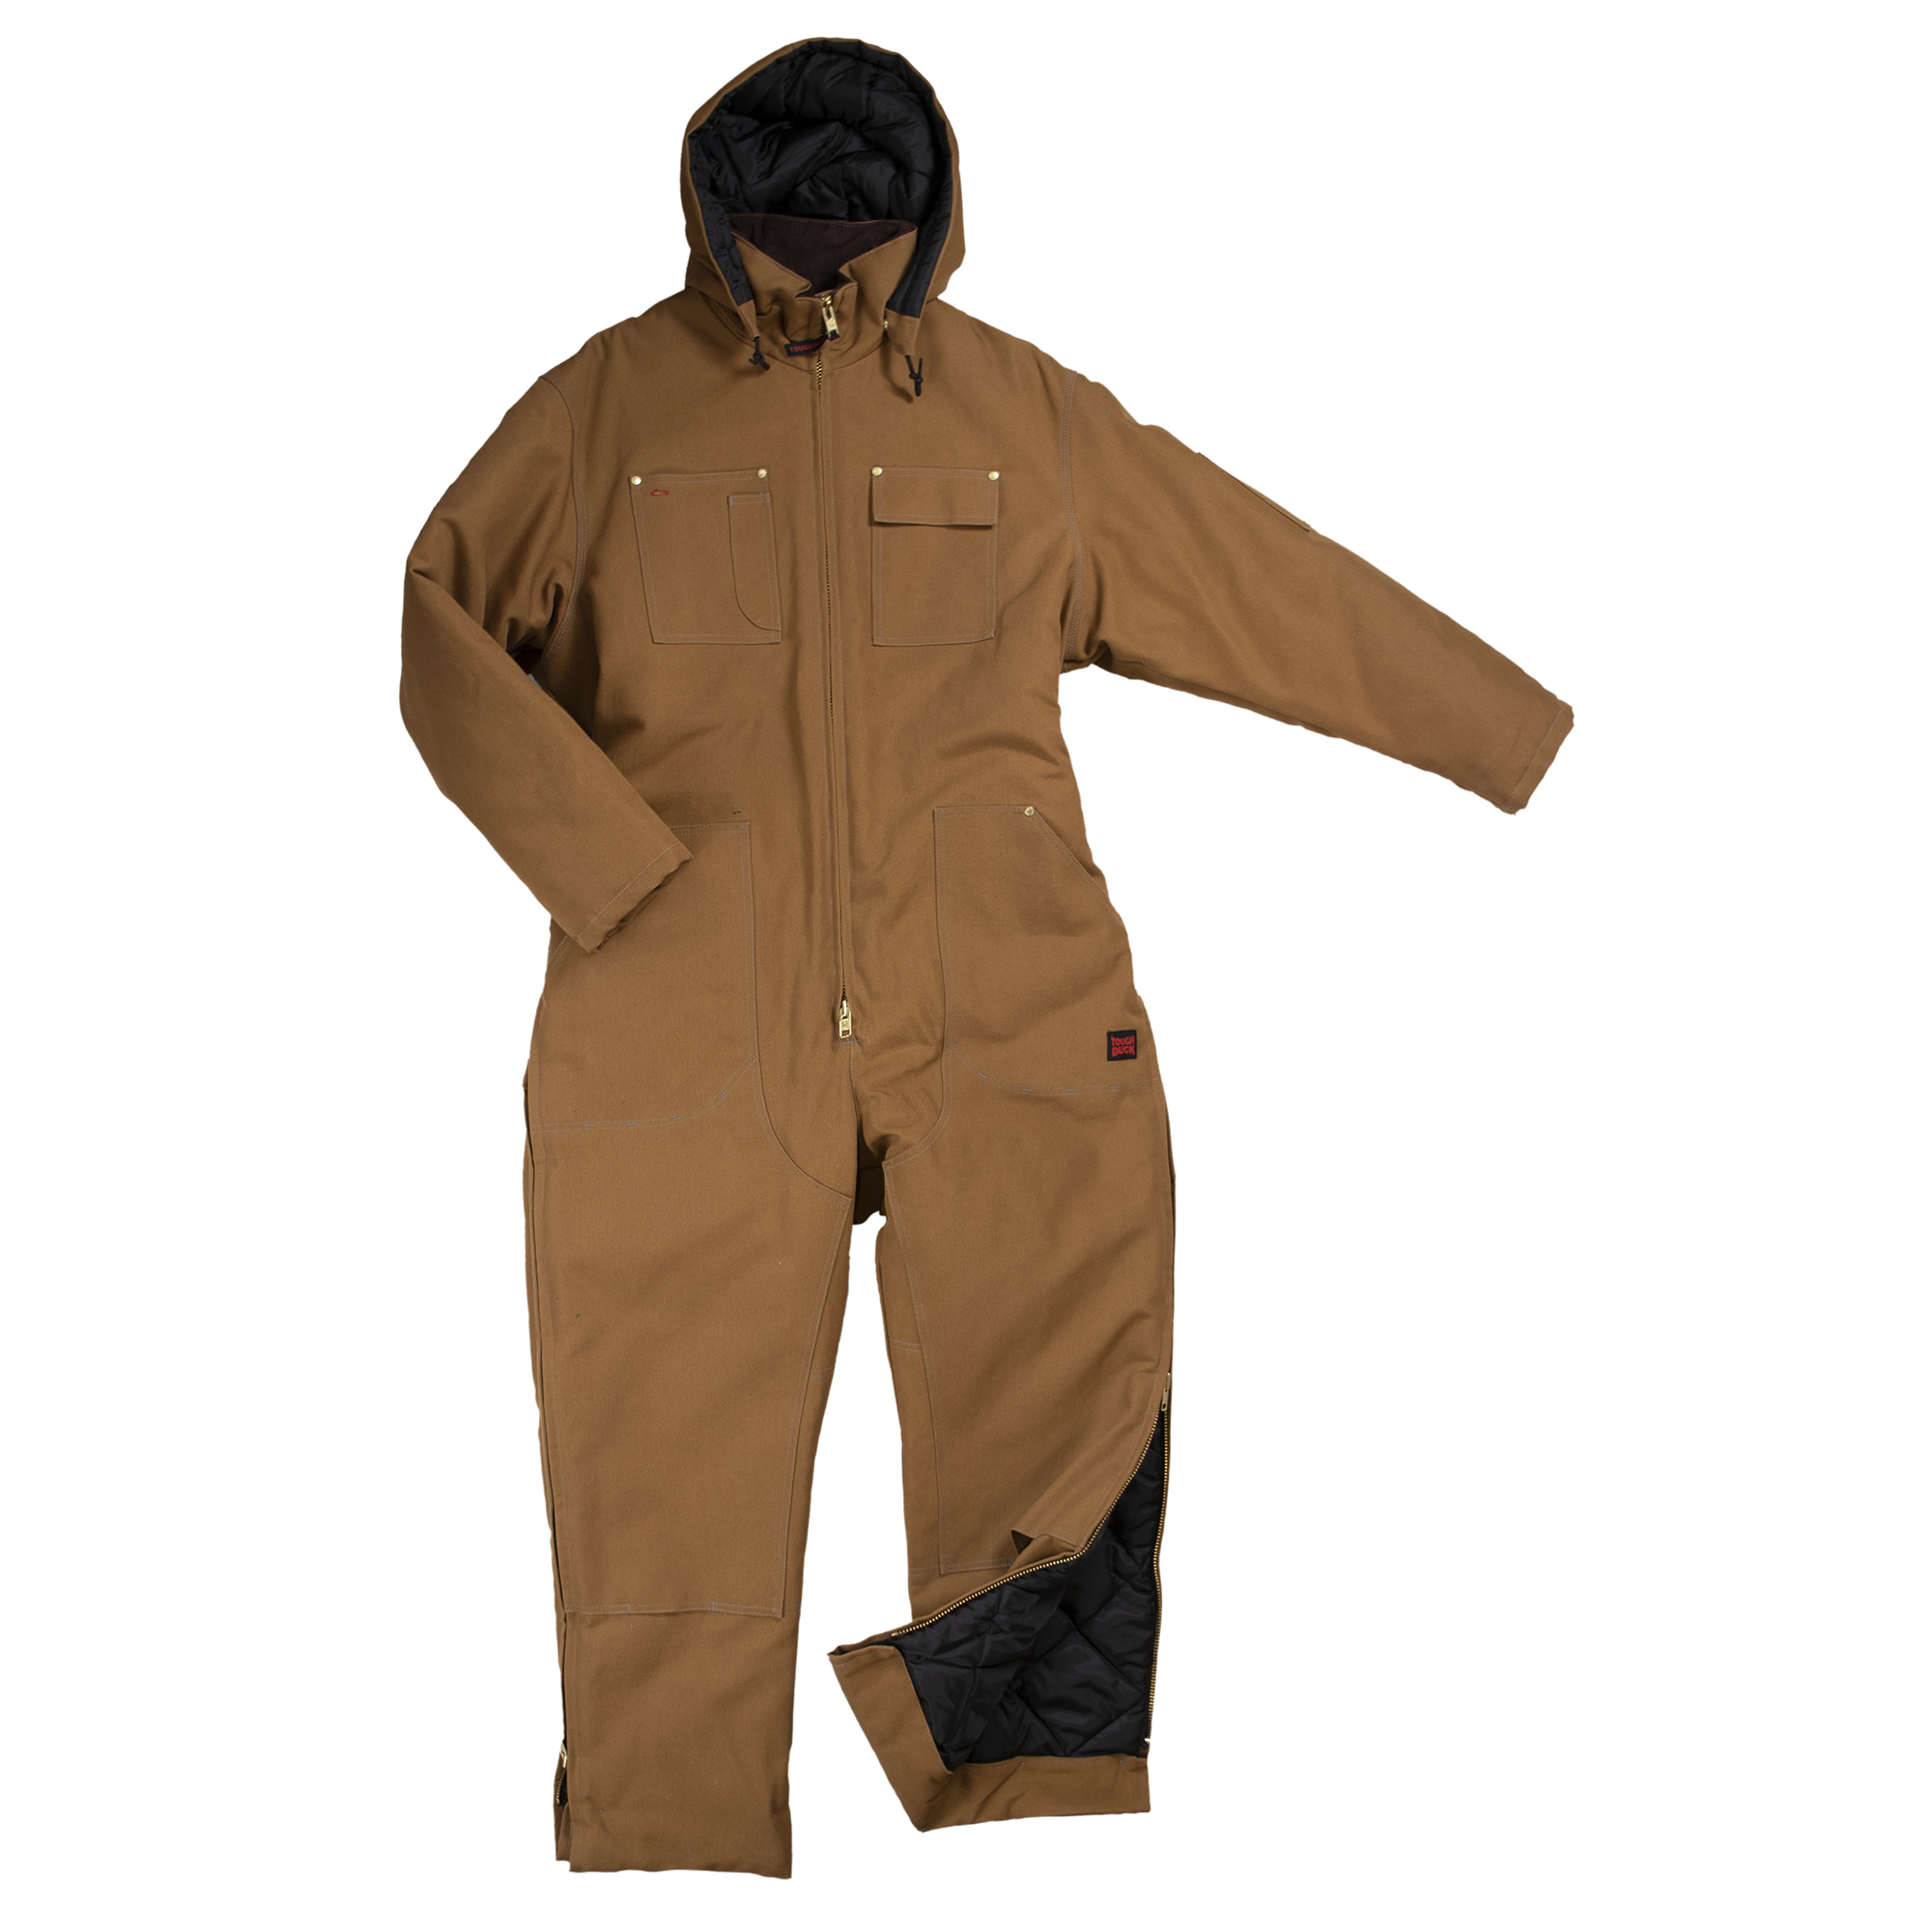 Tough Duck, Insulated Duck Coverall, Size XL, Color Brown, Model WC011